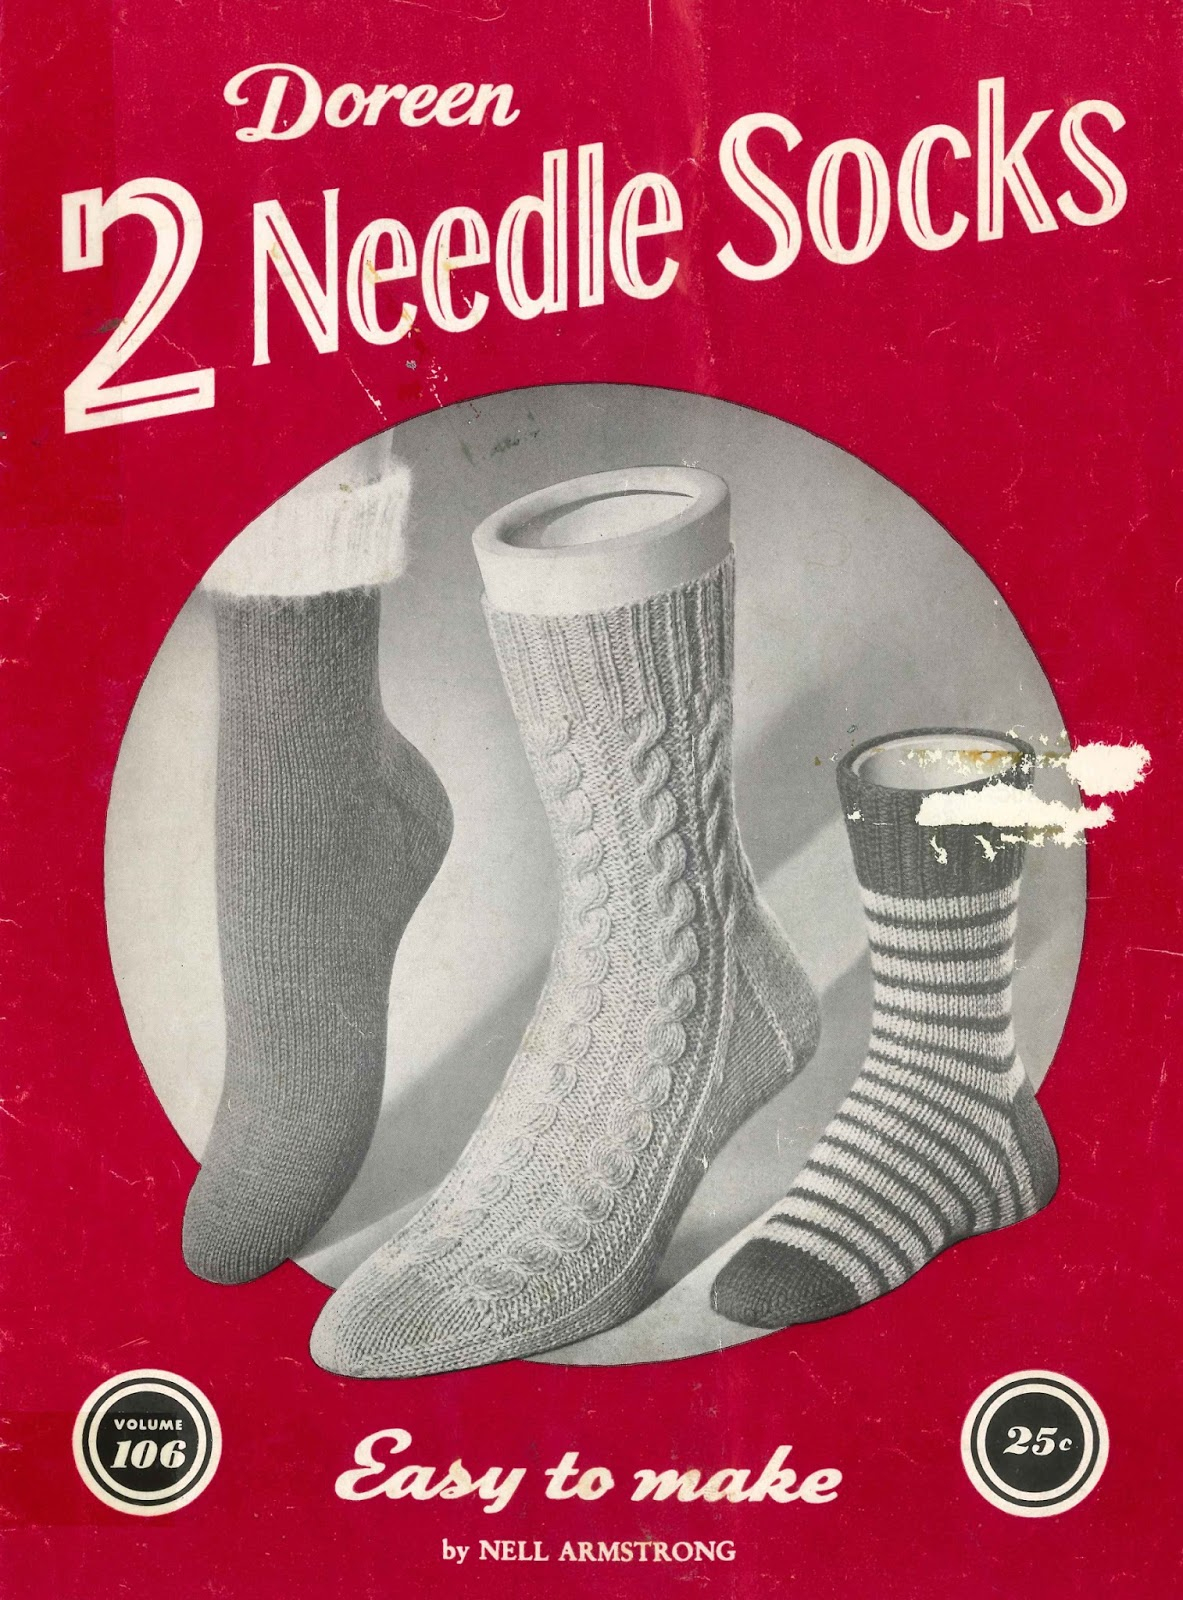 Free Two Needle Sock Knitting Patterns The Vintage Pattern Files 1950s Knitting Doreen 2 Needle Socks